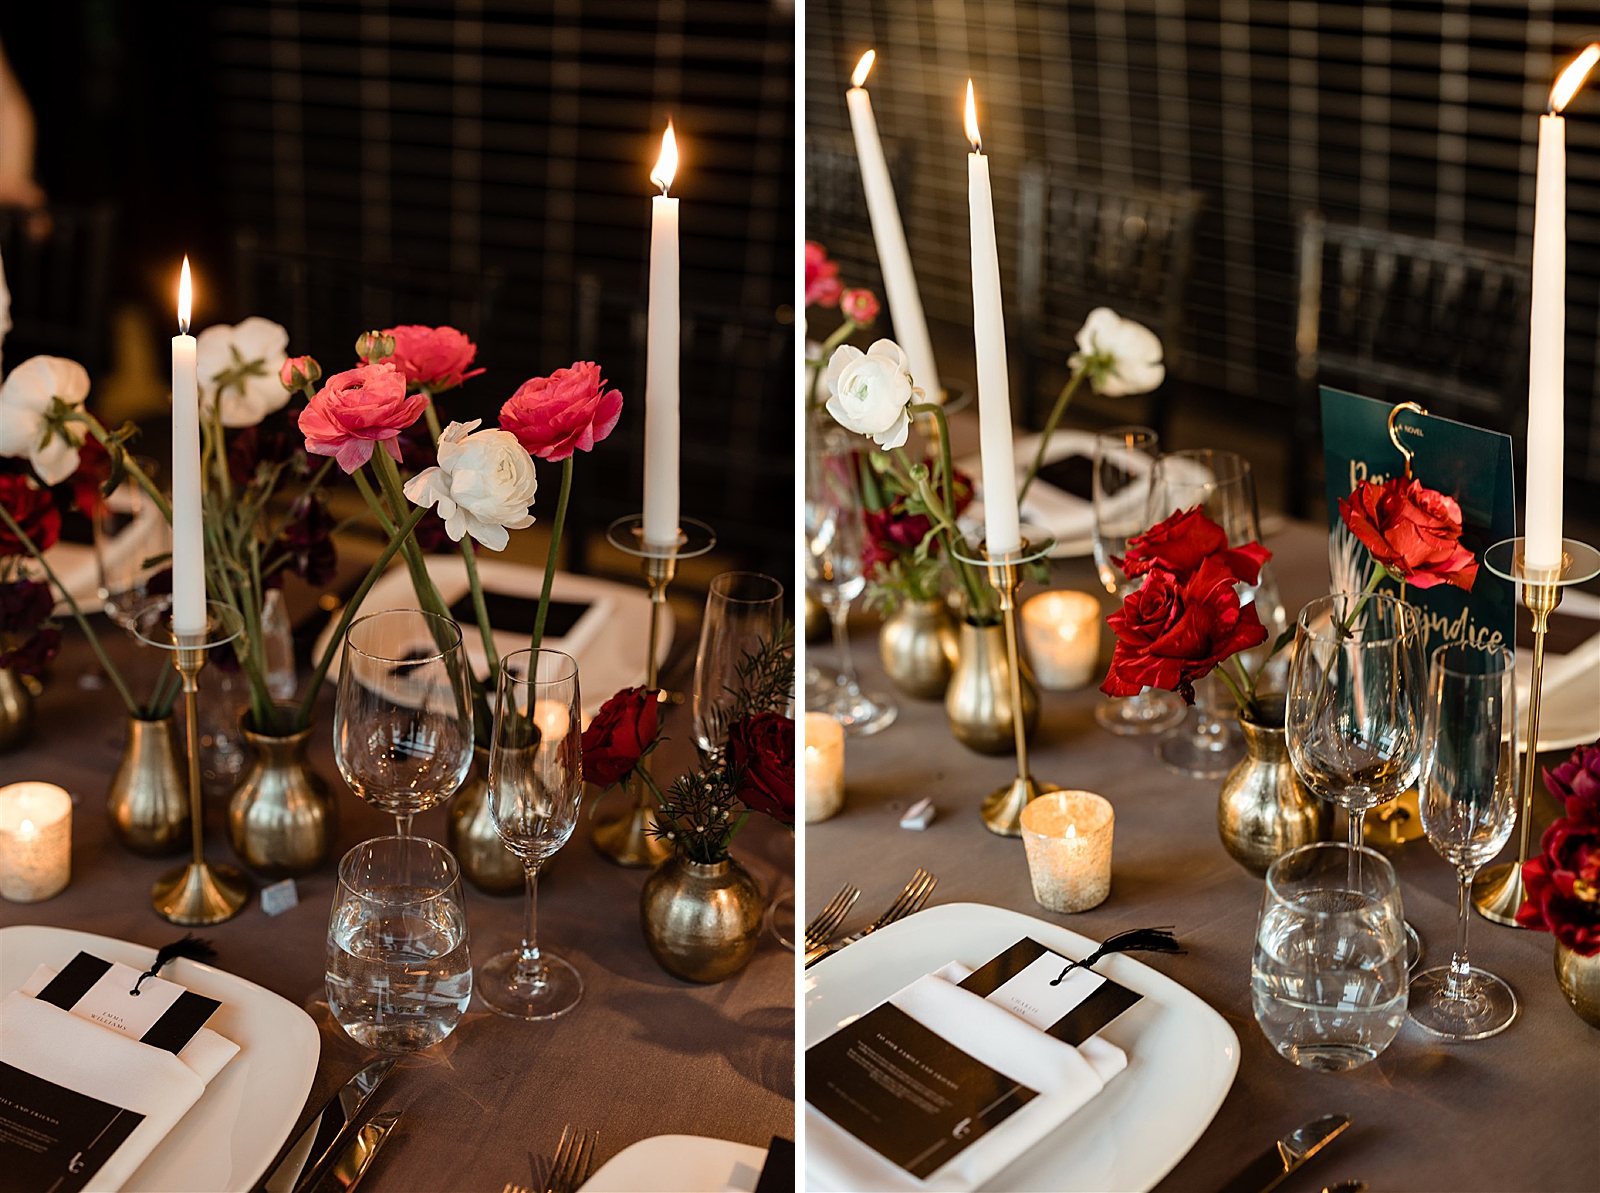 Left photo: Shot of the candles and flowers on the reception table.
Right photo: Shot of the candles and flowers on the reception table. 